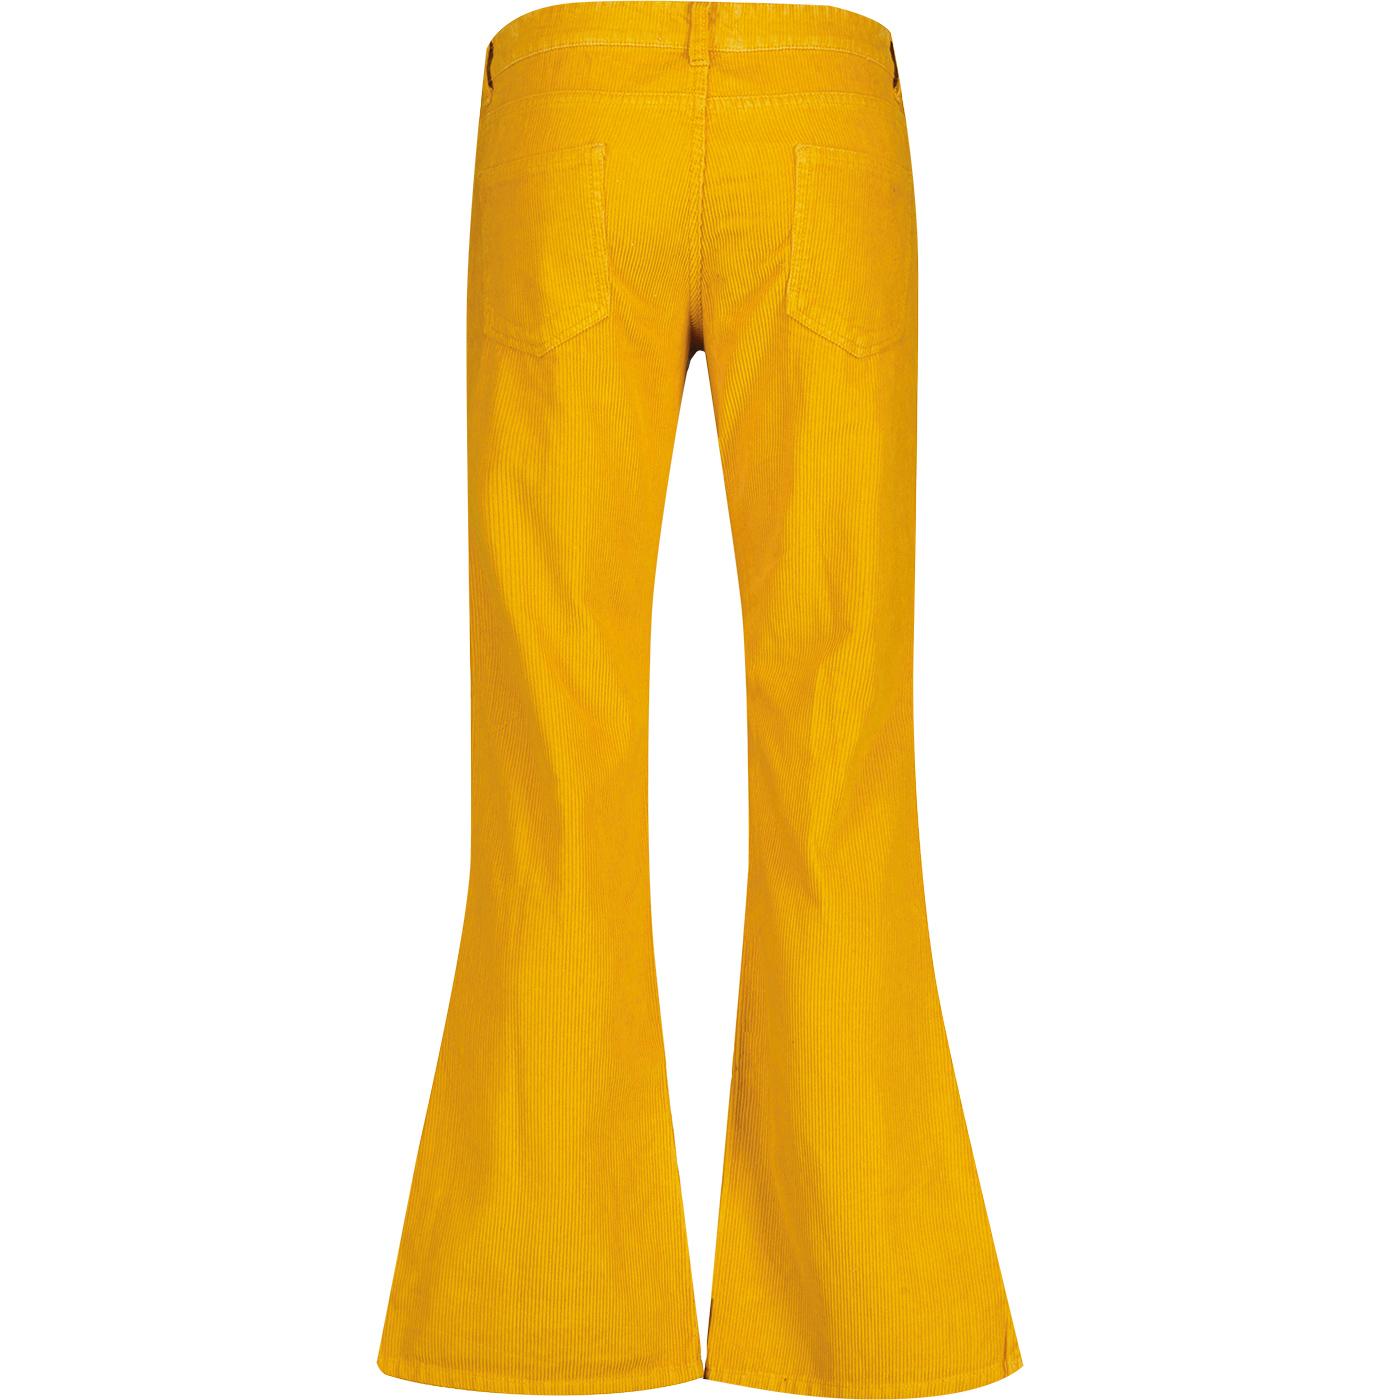 70s Yellow Flared Pants - Small, 26.5